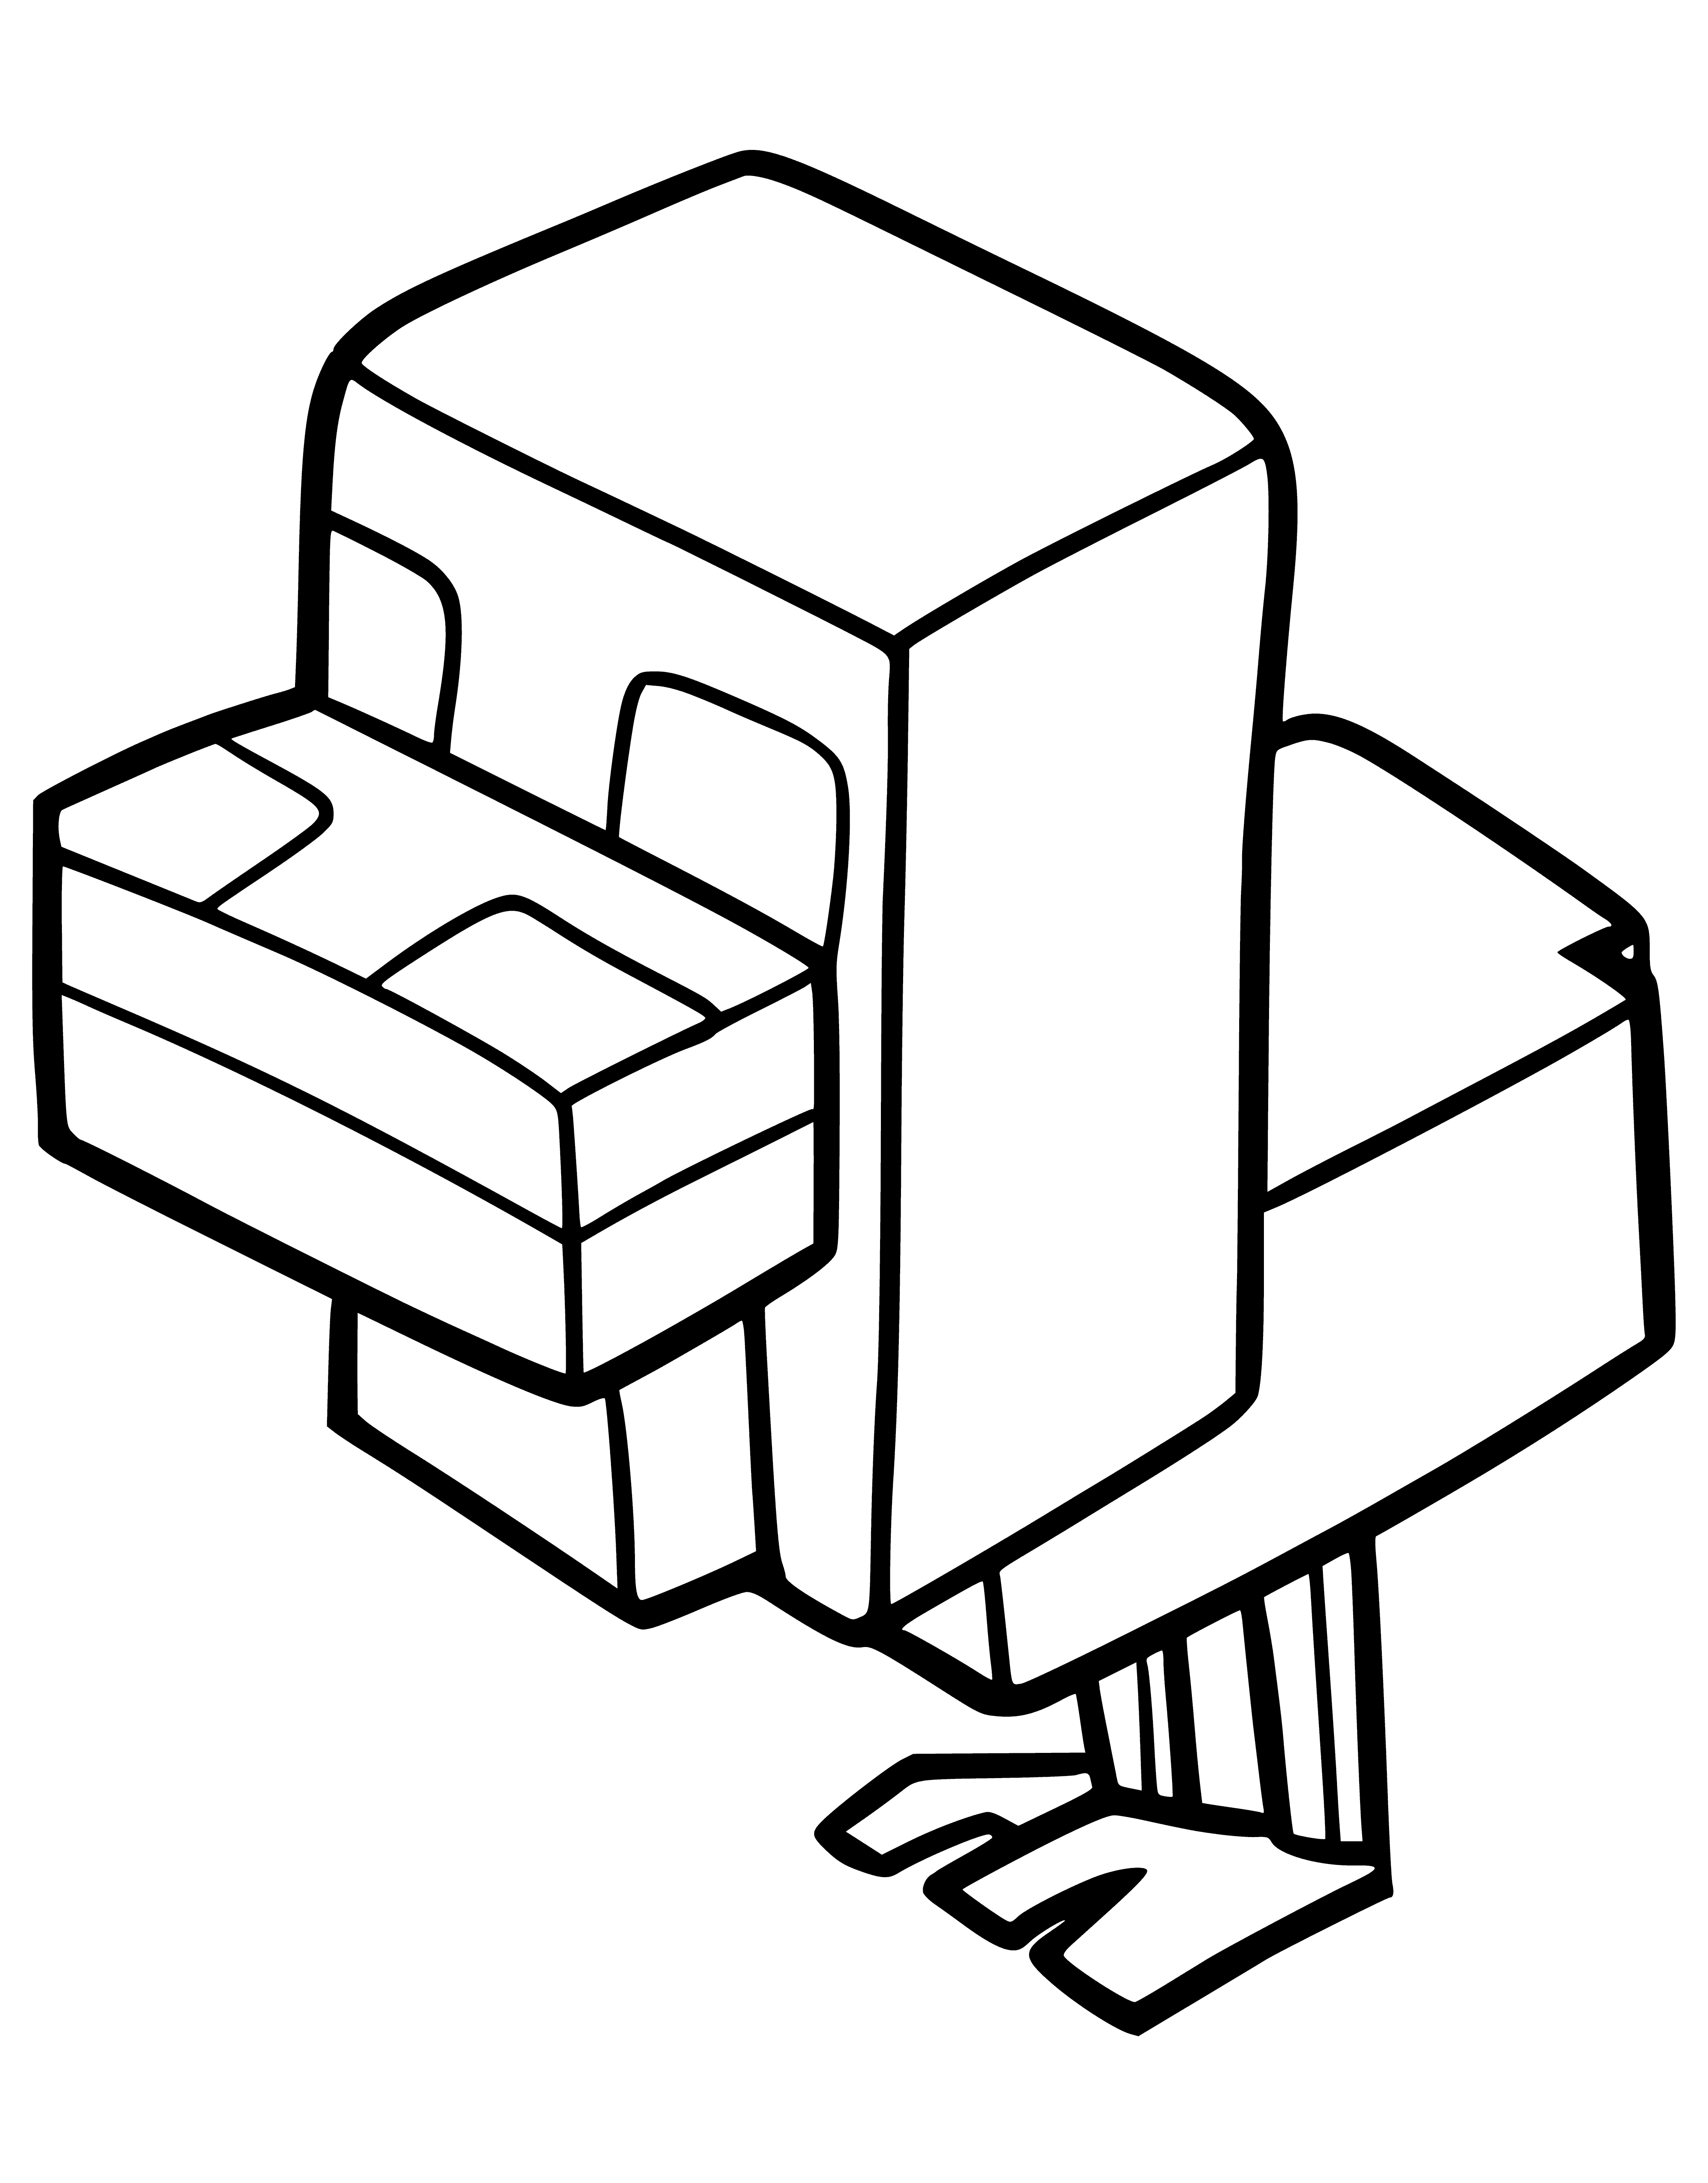 Minecraft Chicken coloring page